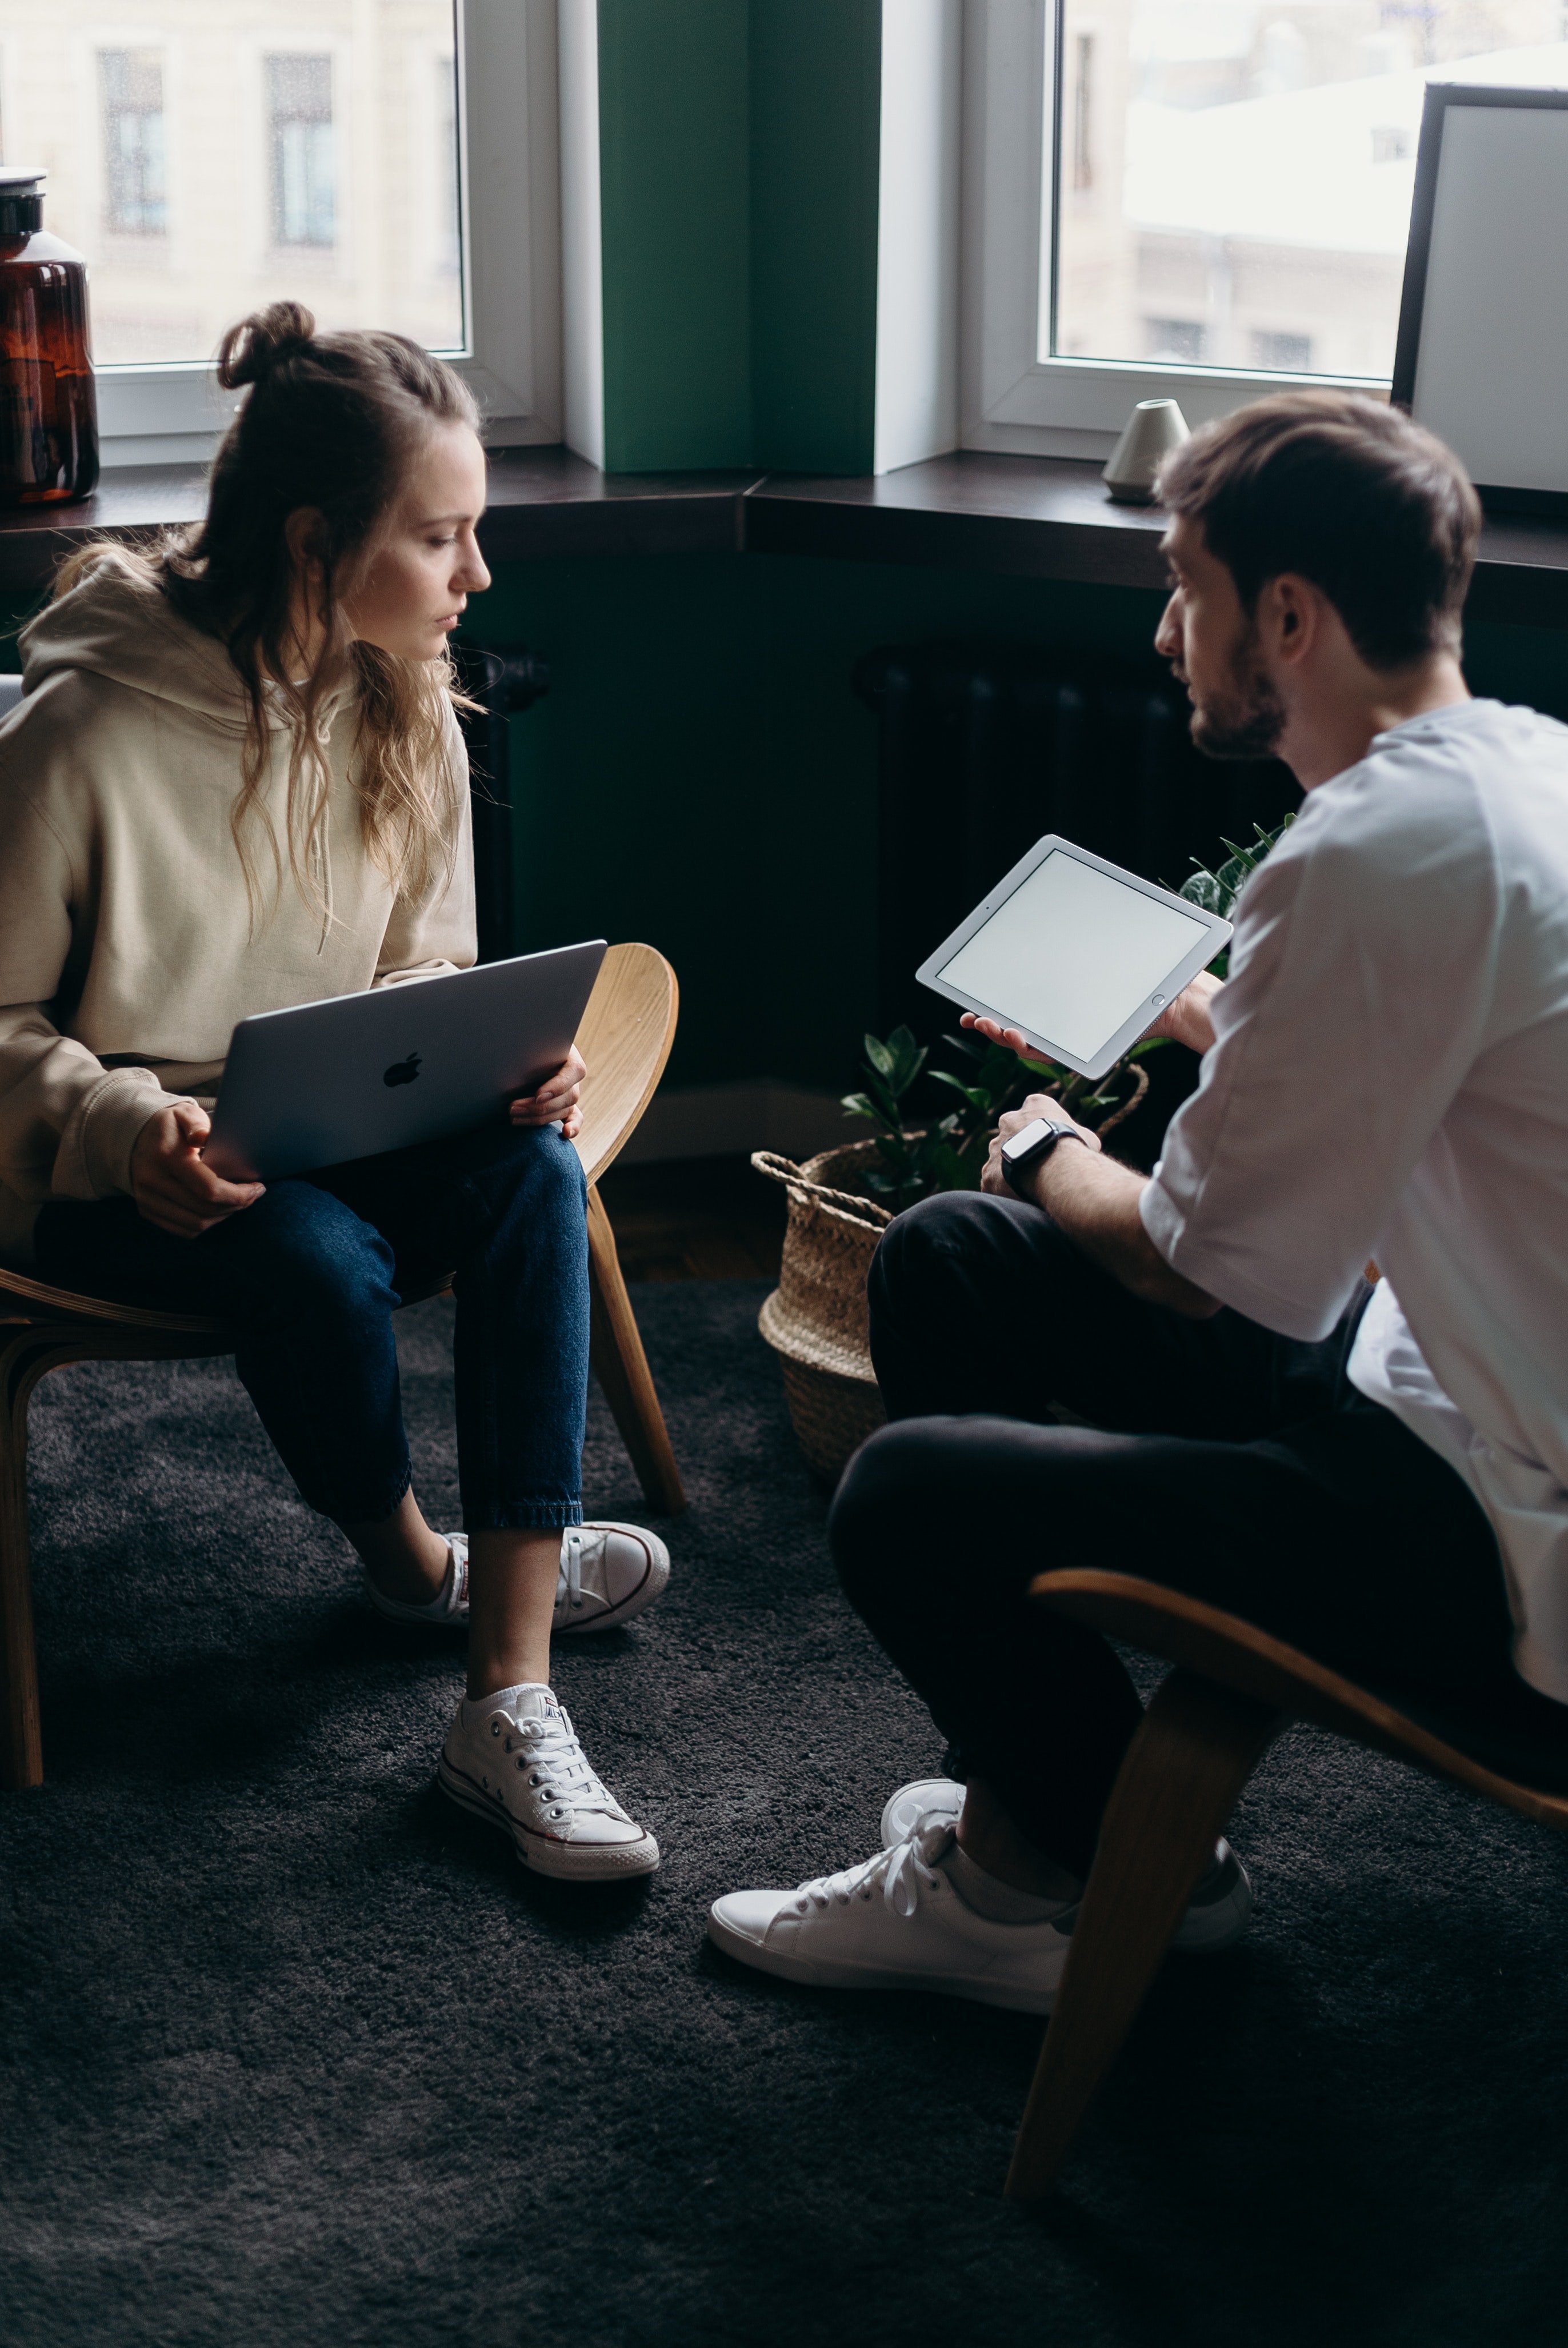 A photo of a couple talking while holding a laptop and an iPad | Source: Pexels 